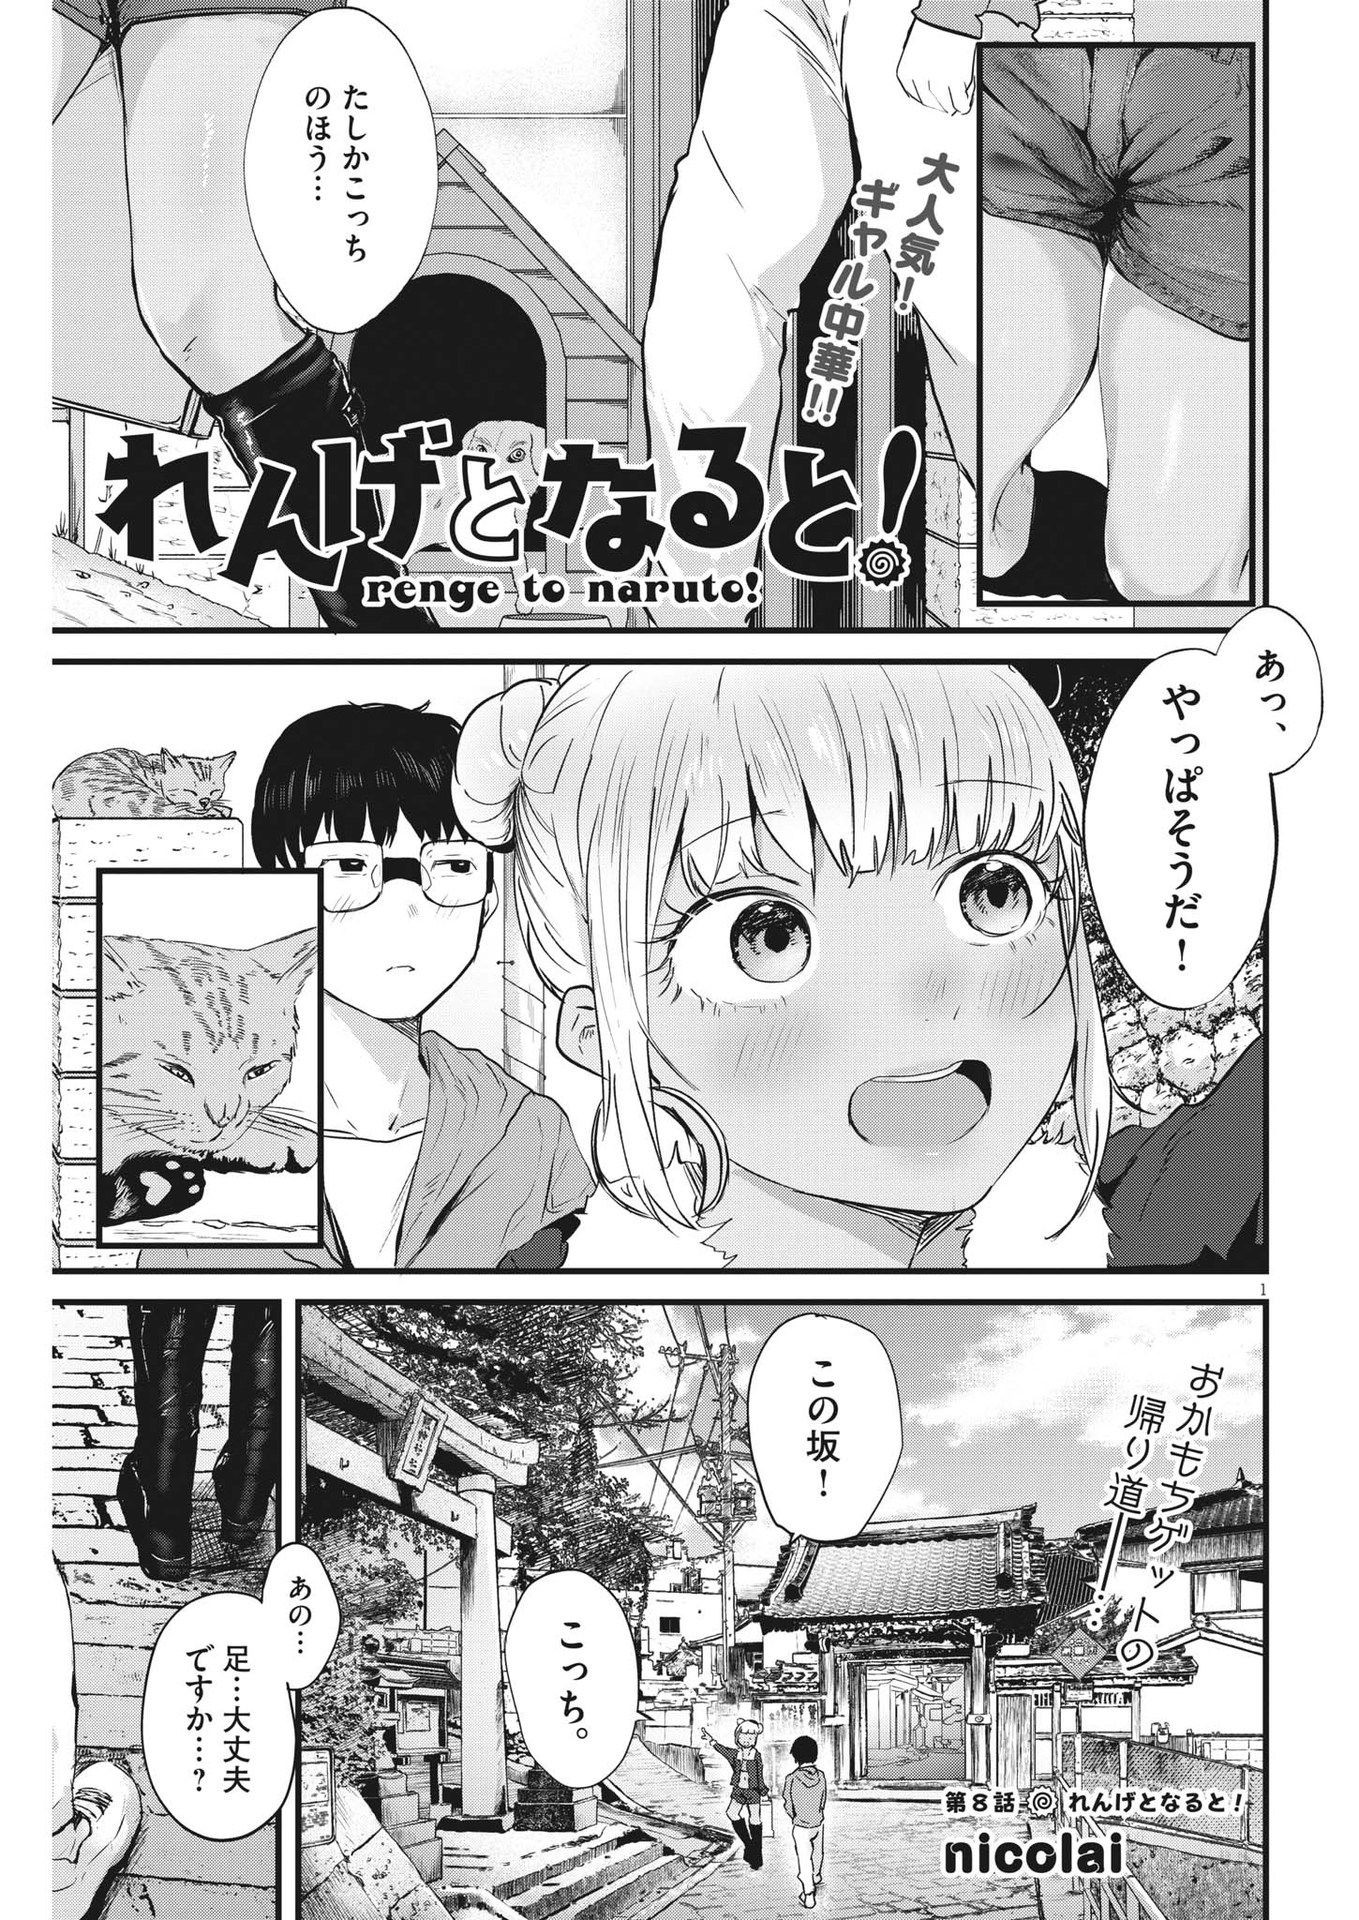 Renge to Naru to! - Chapter 8 - Page 1